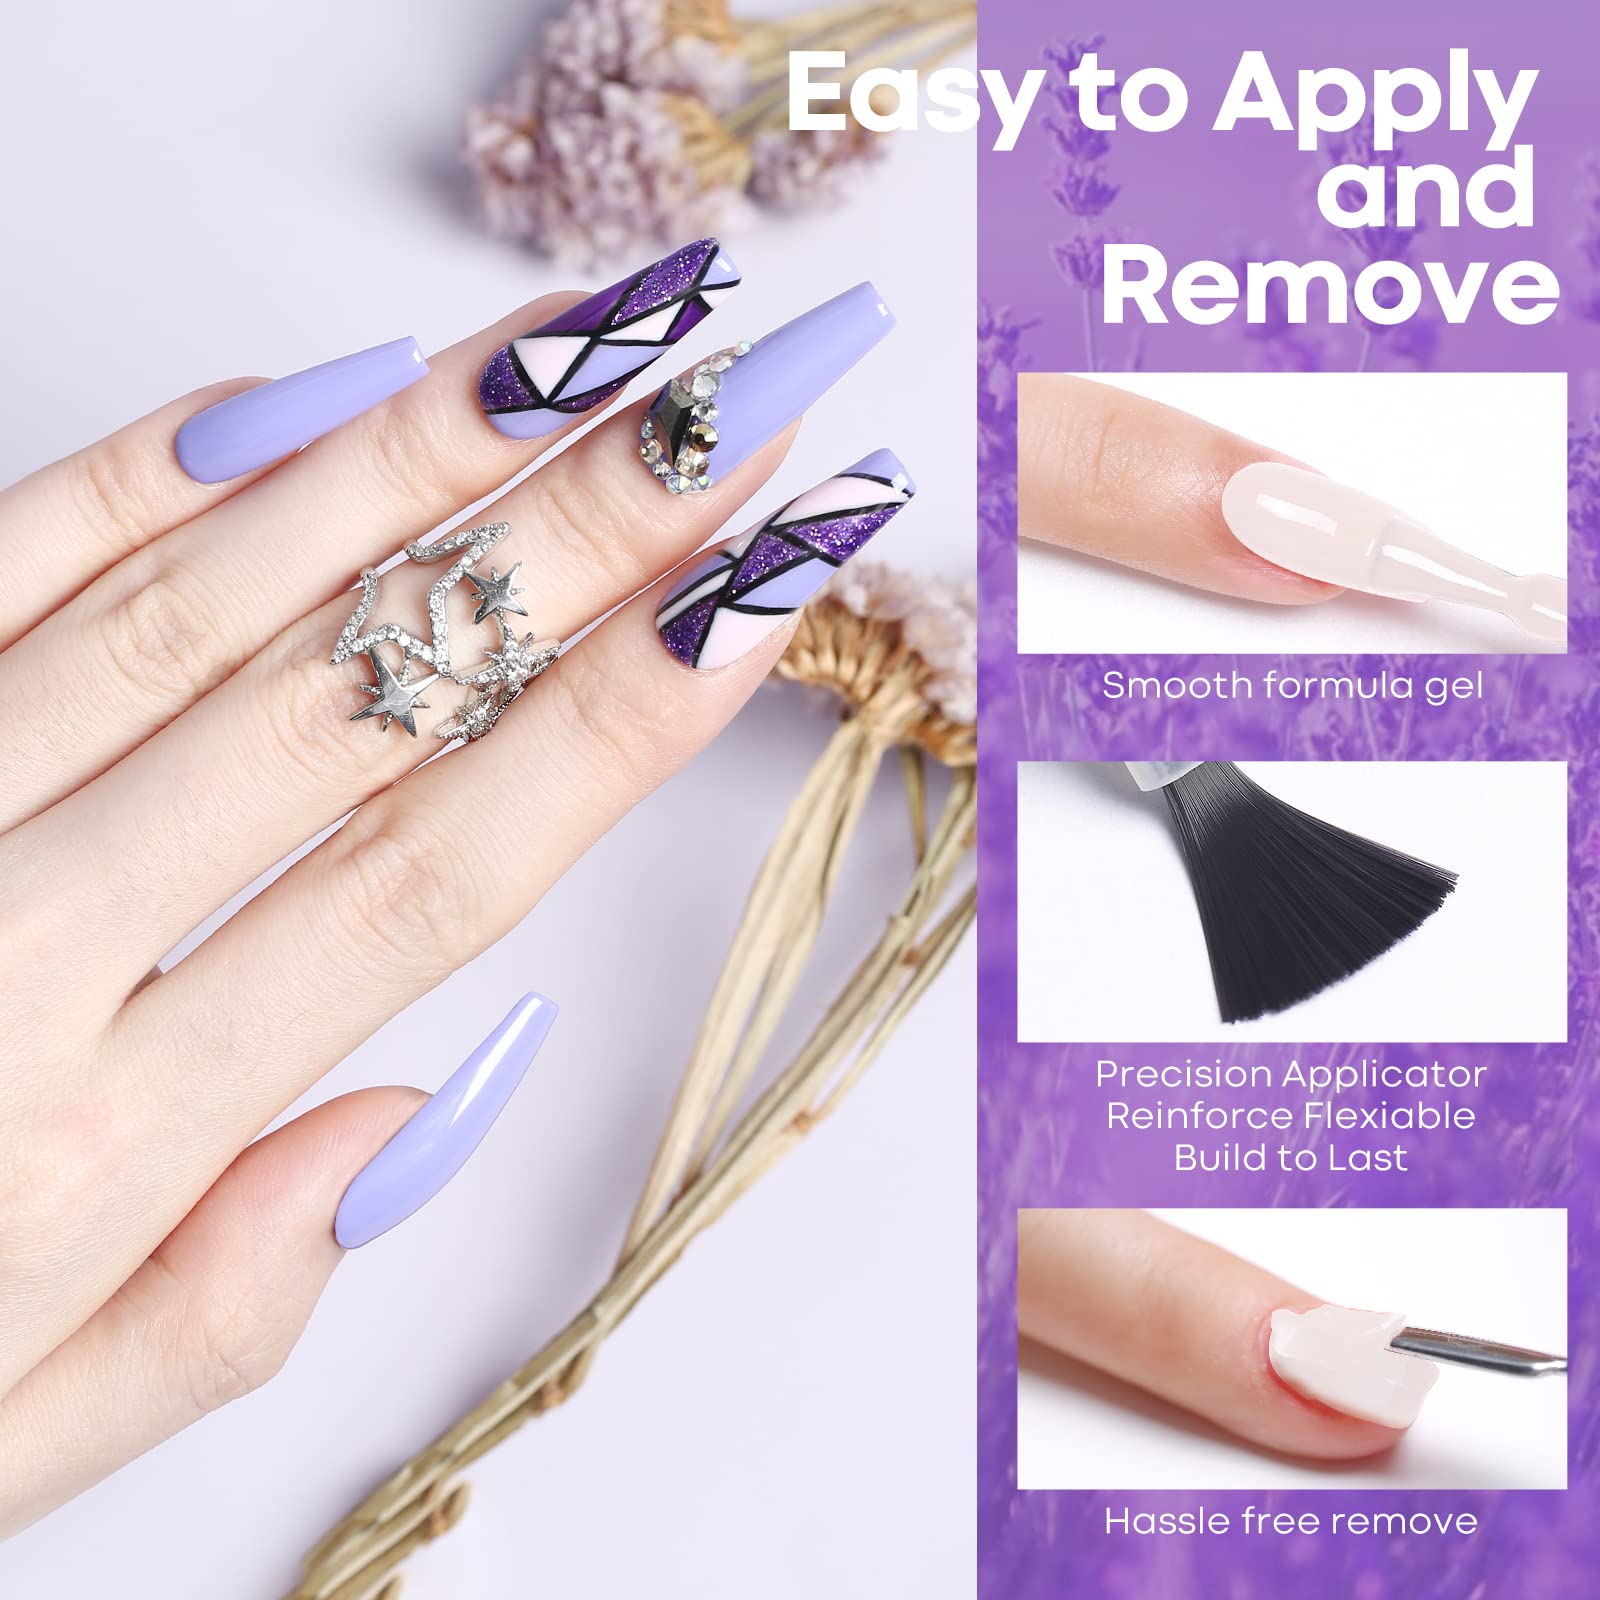 Lilac Obsessions - 6 Shades Inspire Gel Set 7ml【US/CA ONLY】